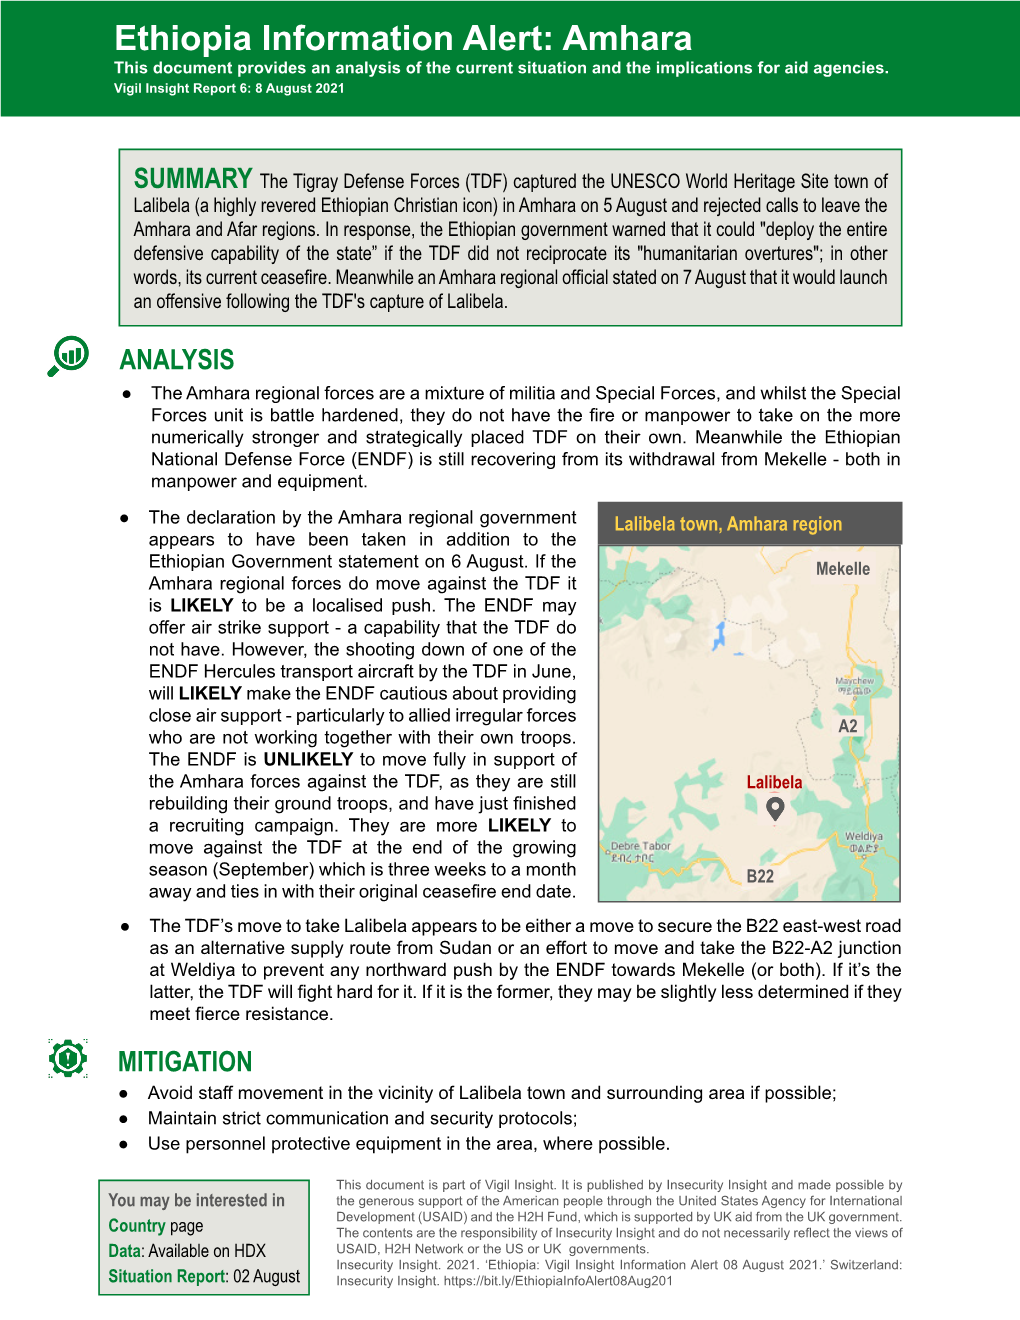 Ethiopia Information Alert: Amhara This Document Provides an Analysis of the Current Situation and the Implications for Aid Agencies